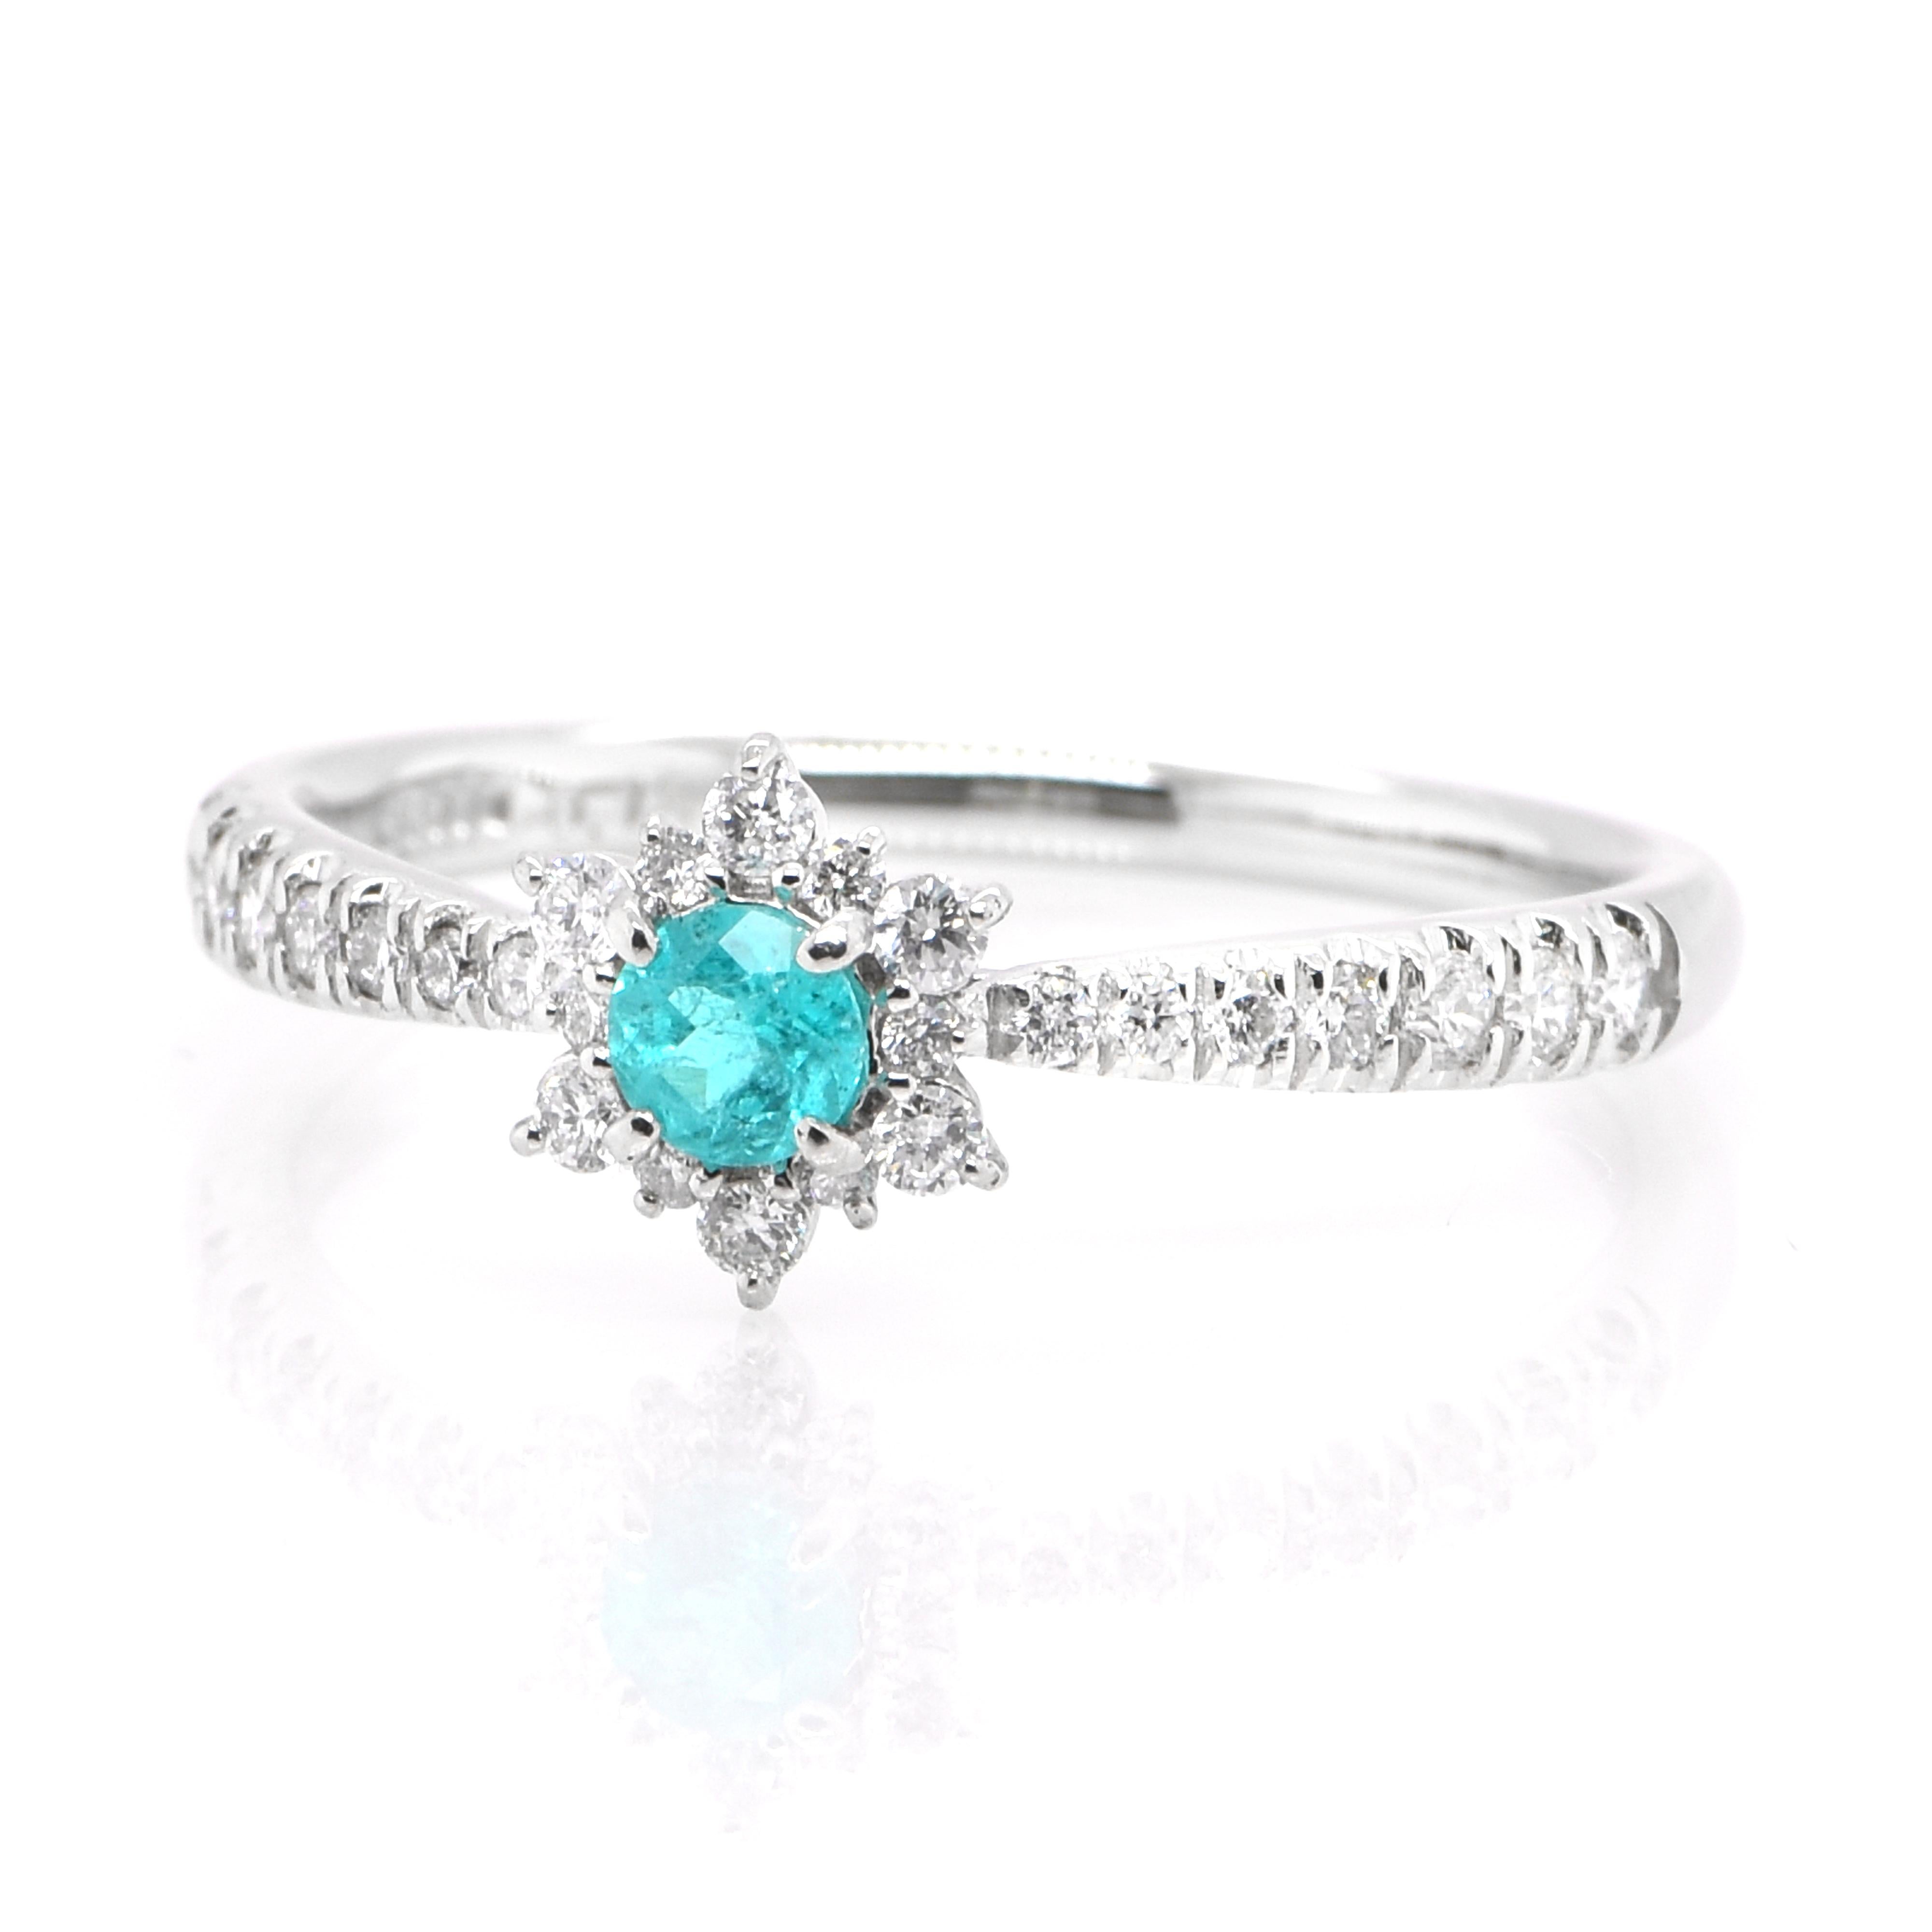 A beautiful ring featuring a 0.13 Carat Natural Brazilian Paraiba Tourmaline and 0.22 Carats of Diamond Accents set in Platinum. Paraiba Tourmalines were only discovered 30 years ago in the Brazilian state of the same name- Paraiba. Since then they